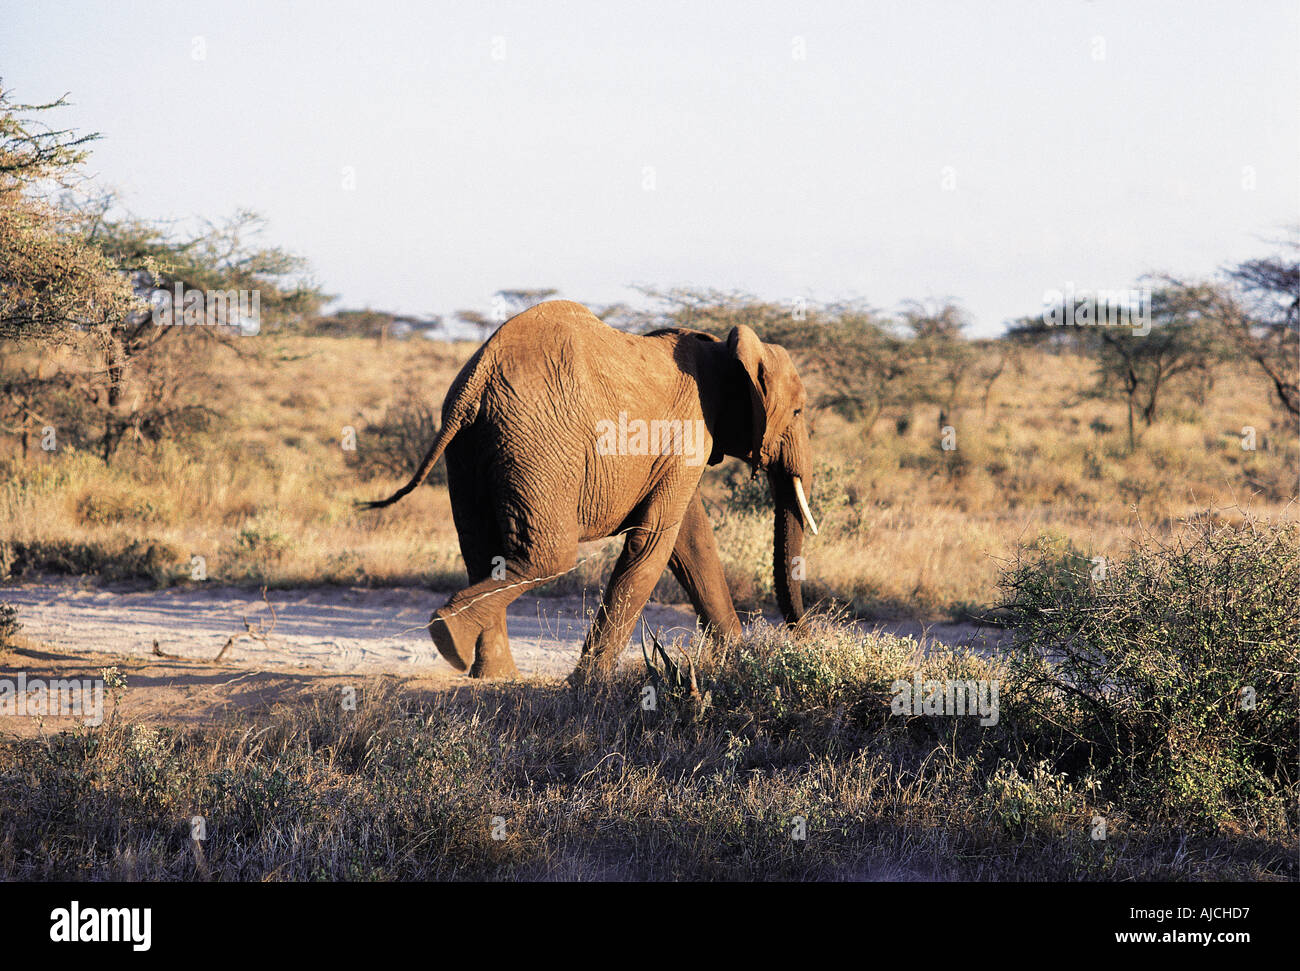 Young elephant dragging a wire snare around its neck Samburu National Reserve Kenya East Africa Stock Photo